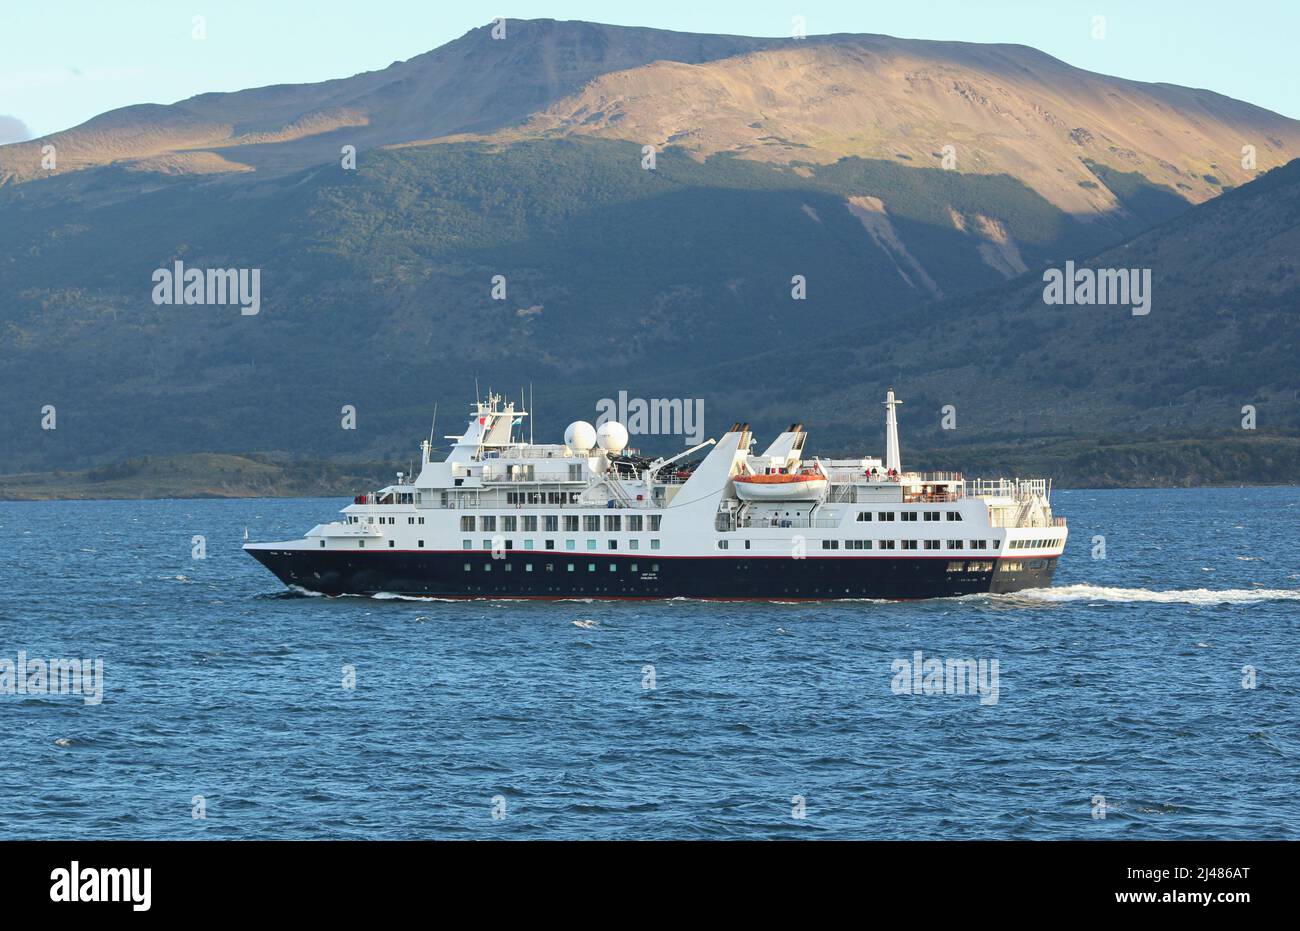 The new expedition cruise line Exploris bought the Silver Explorer. (Silversea). The cruise ship will start sailing for Exploris in December 2023. Stock Photo